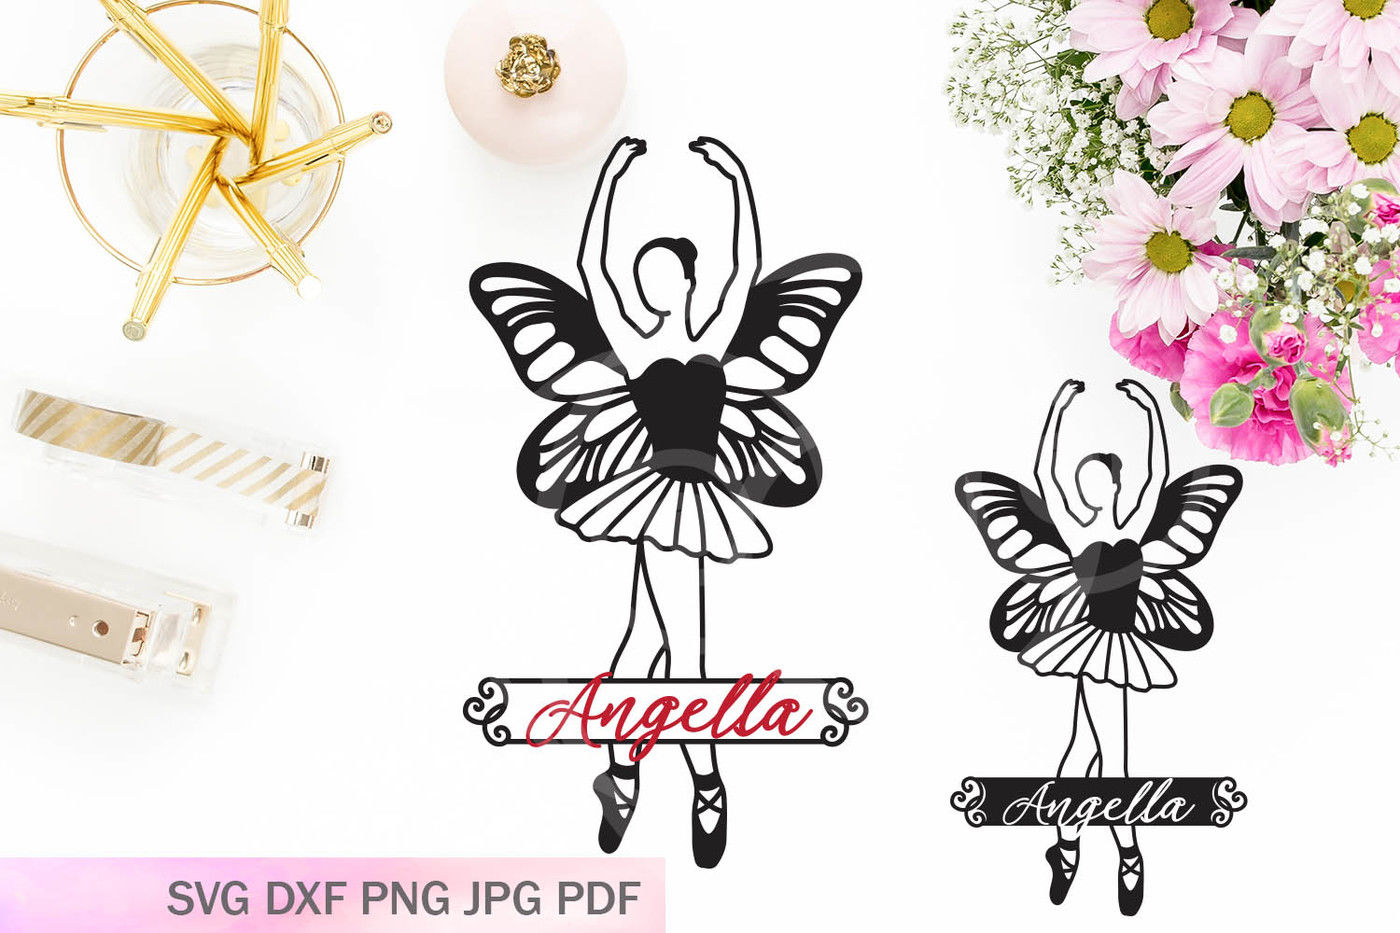 Download Ballerina With Wings Svg Paper Cutting Template Butterfly Wings Pdf By Kartcreation Thehungryjpeg Com